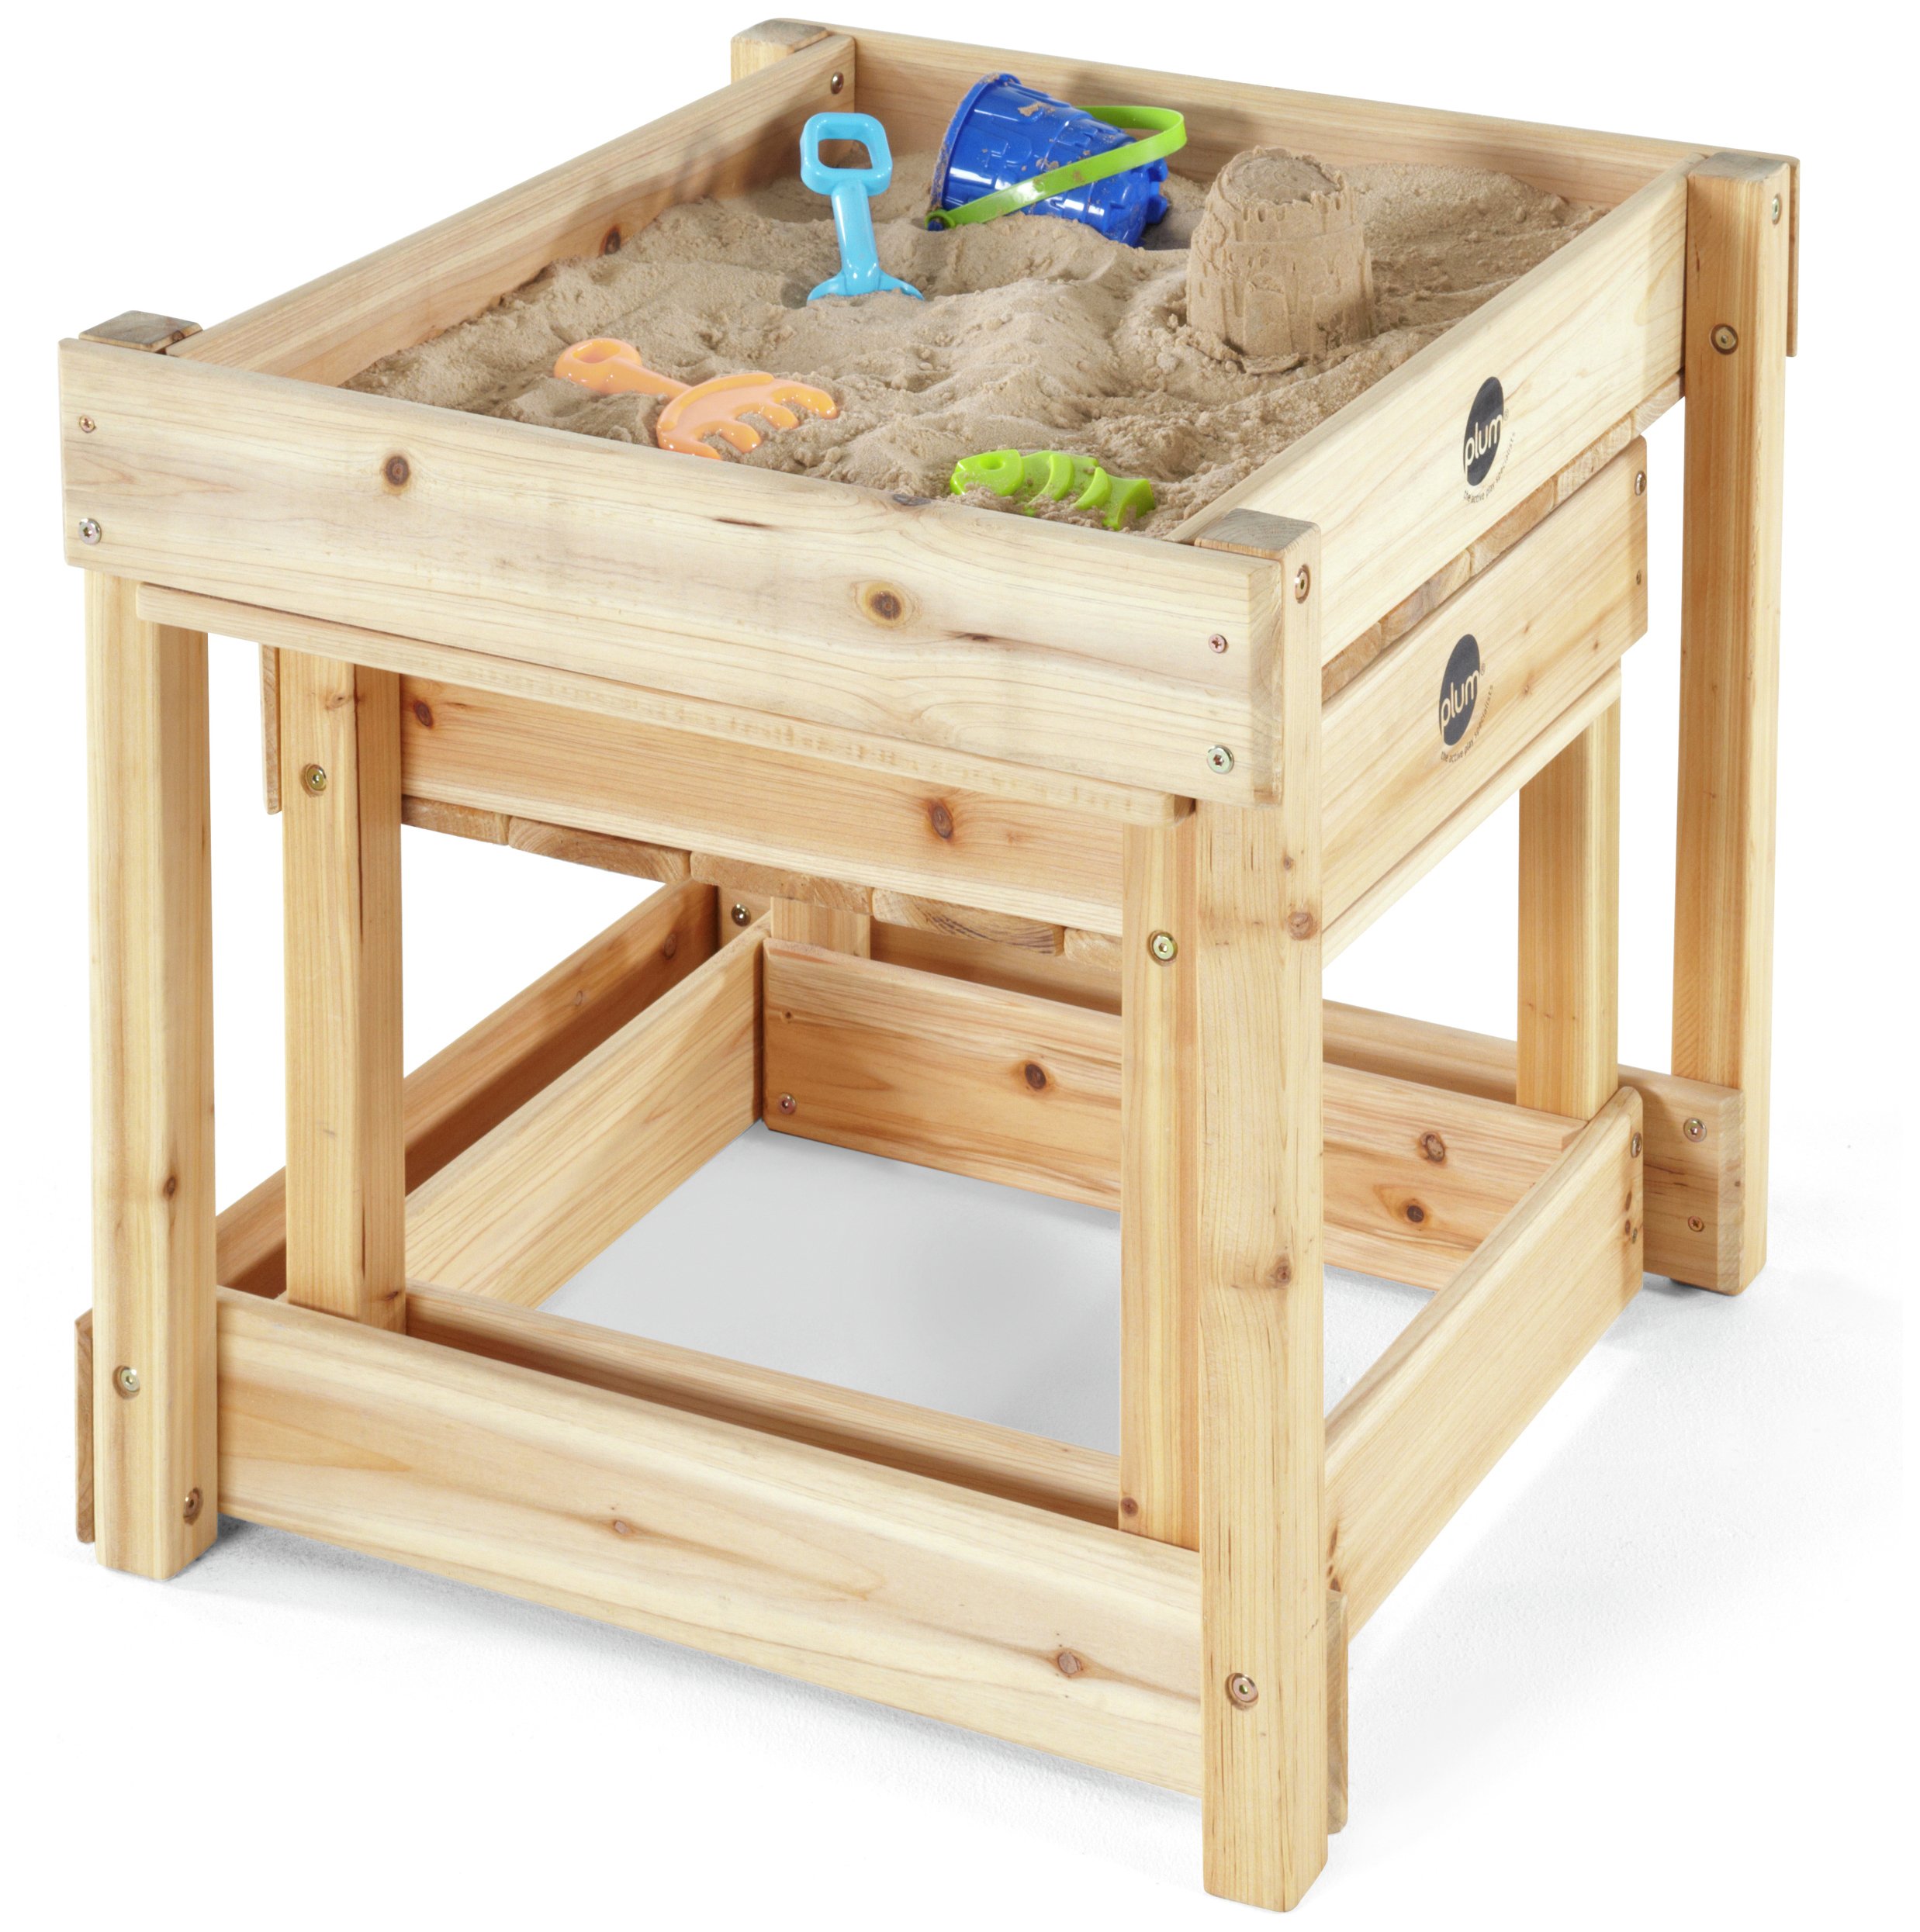 Plum Sandy Bay Wooden Sand Pit and Water Table. Review